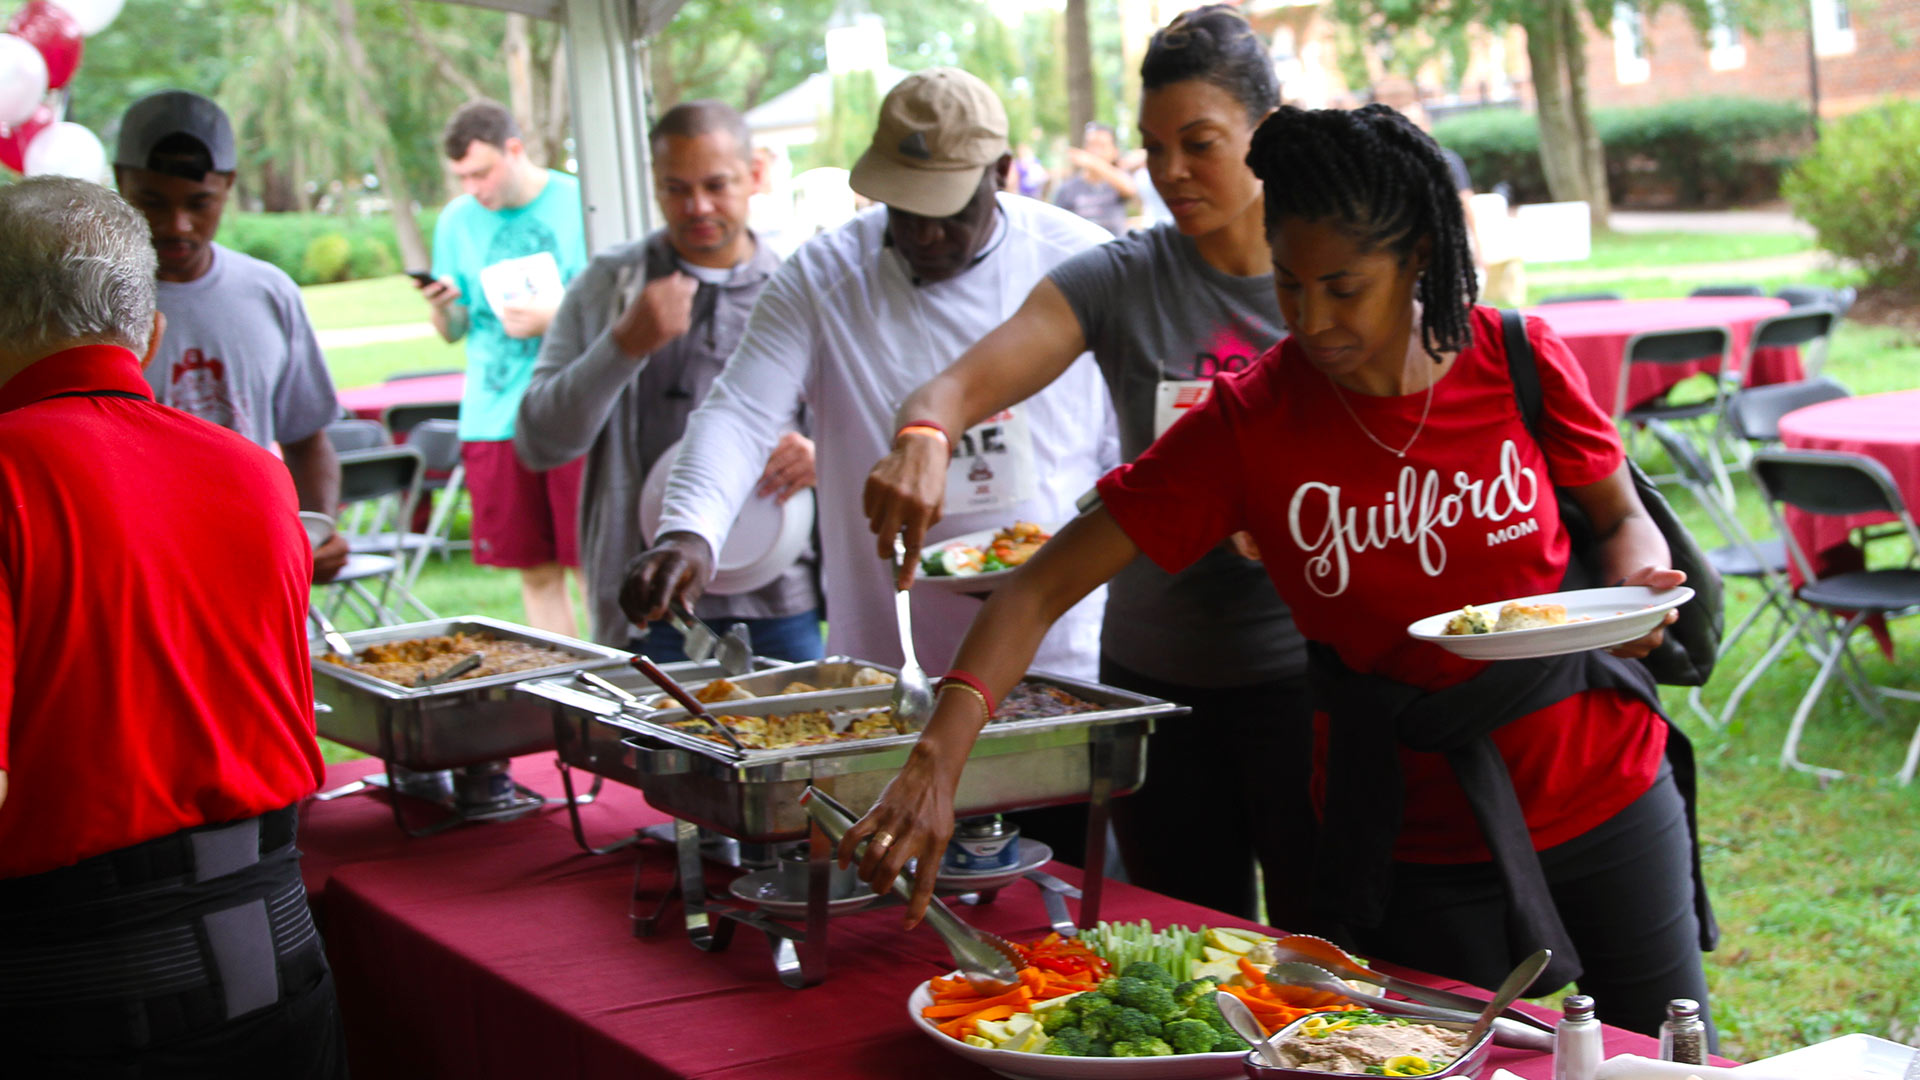 Guilfordians fill their plates with delicious food at the Homecoming brunch.